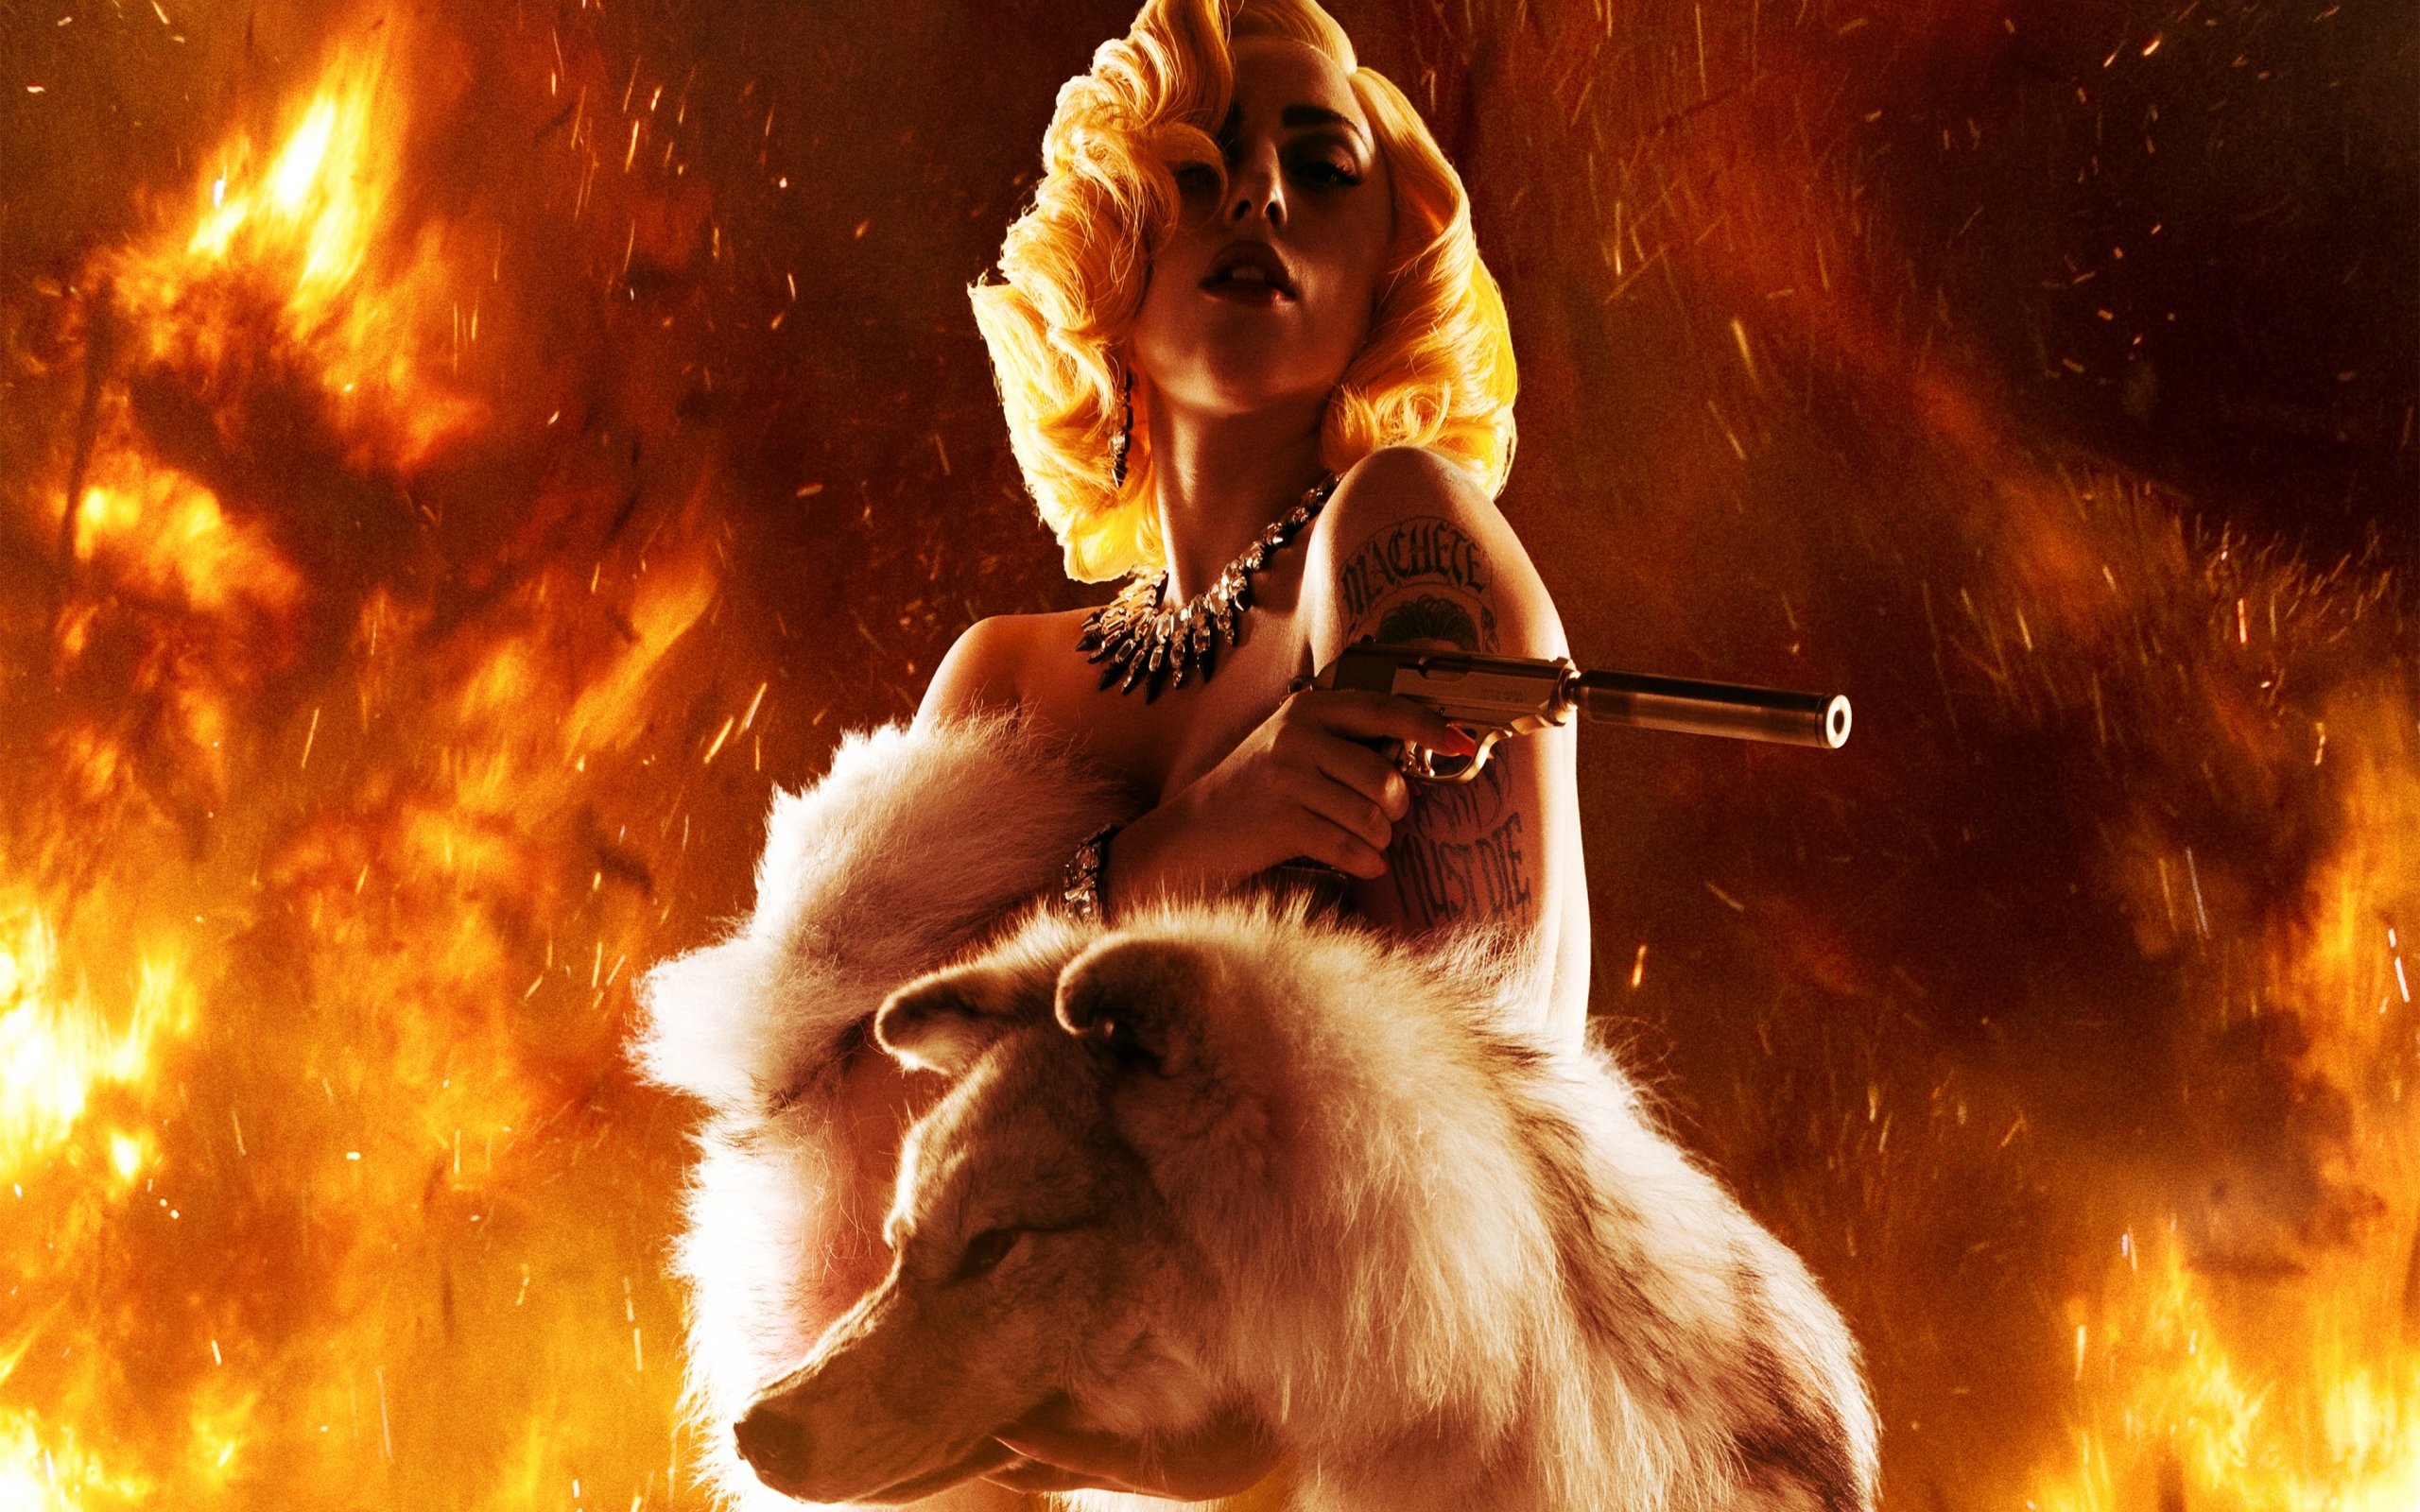 machete, Kills, Action, Comedy, Crime, , Babe, Wolf, Wolves, Fire, Fantasy, Blonde Wallpaper HD / Desktop and Mobile Background